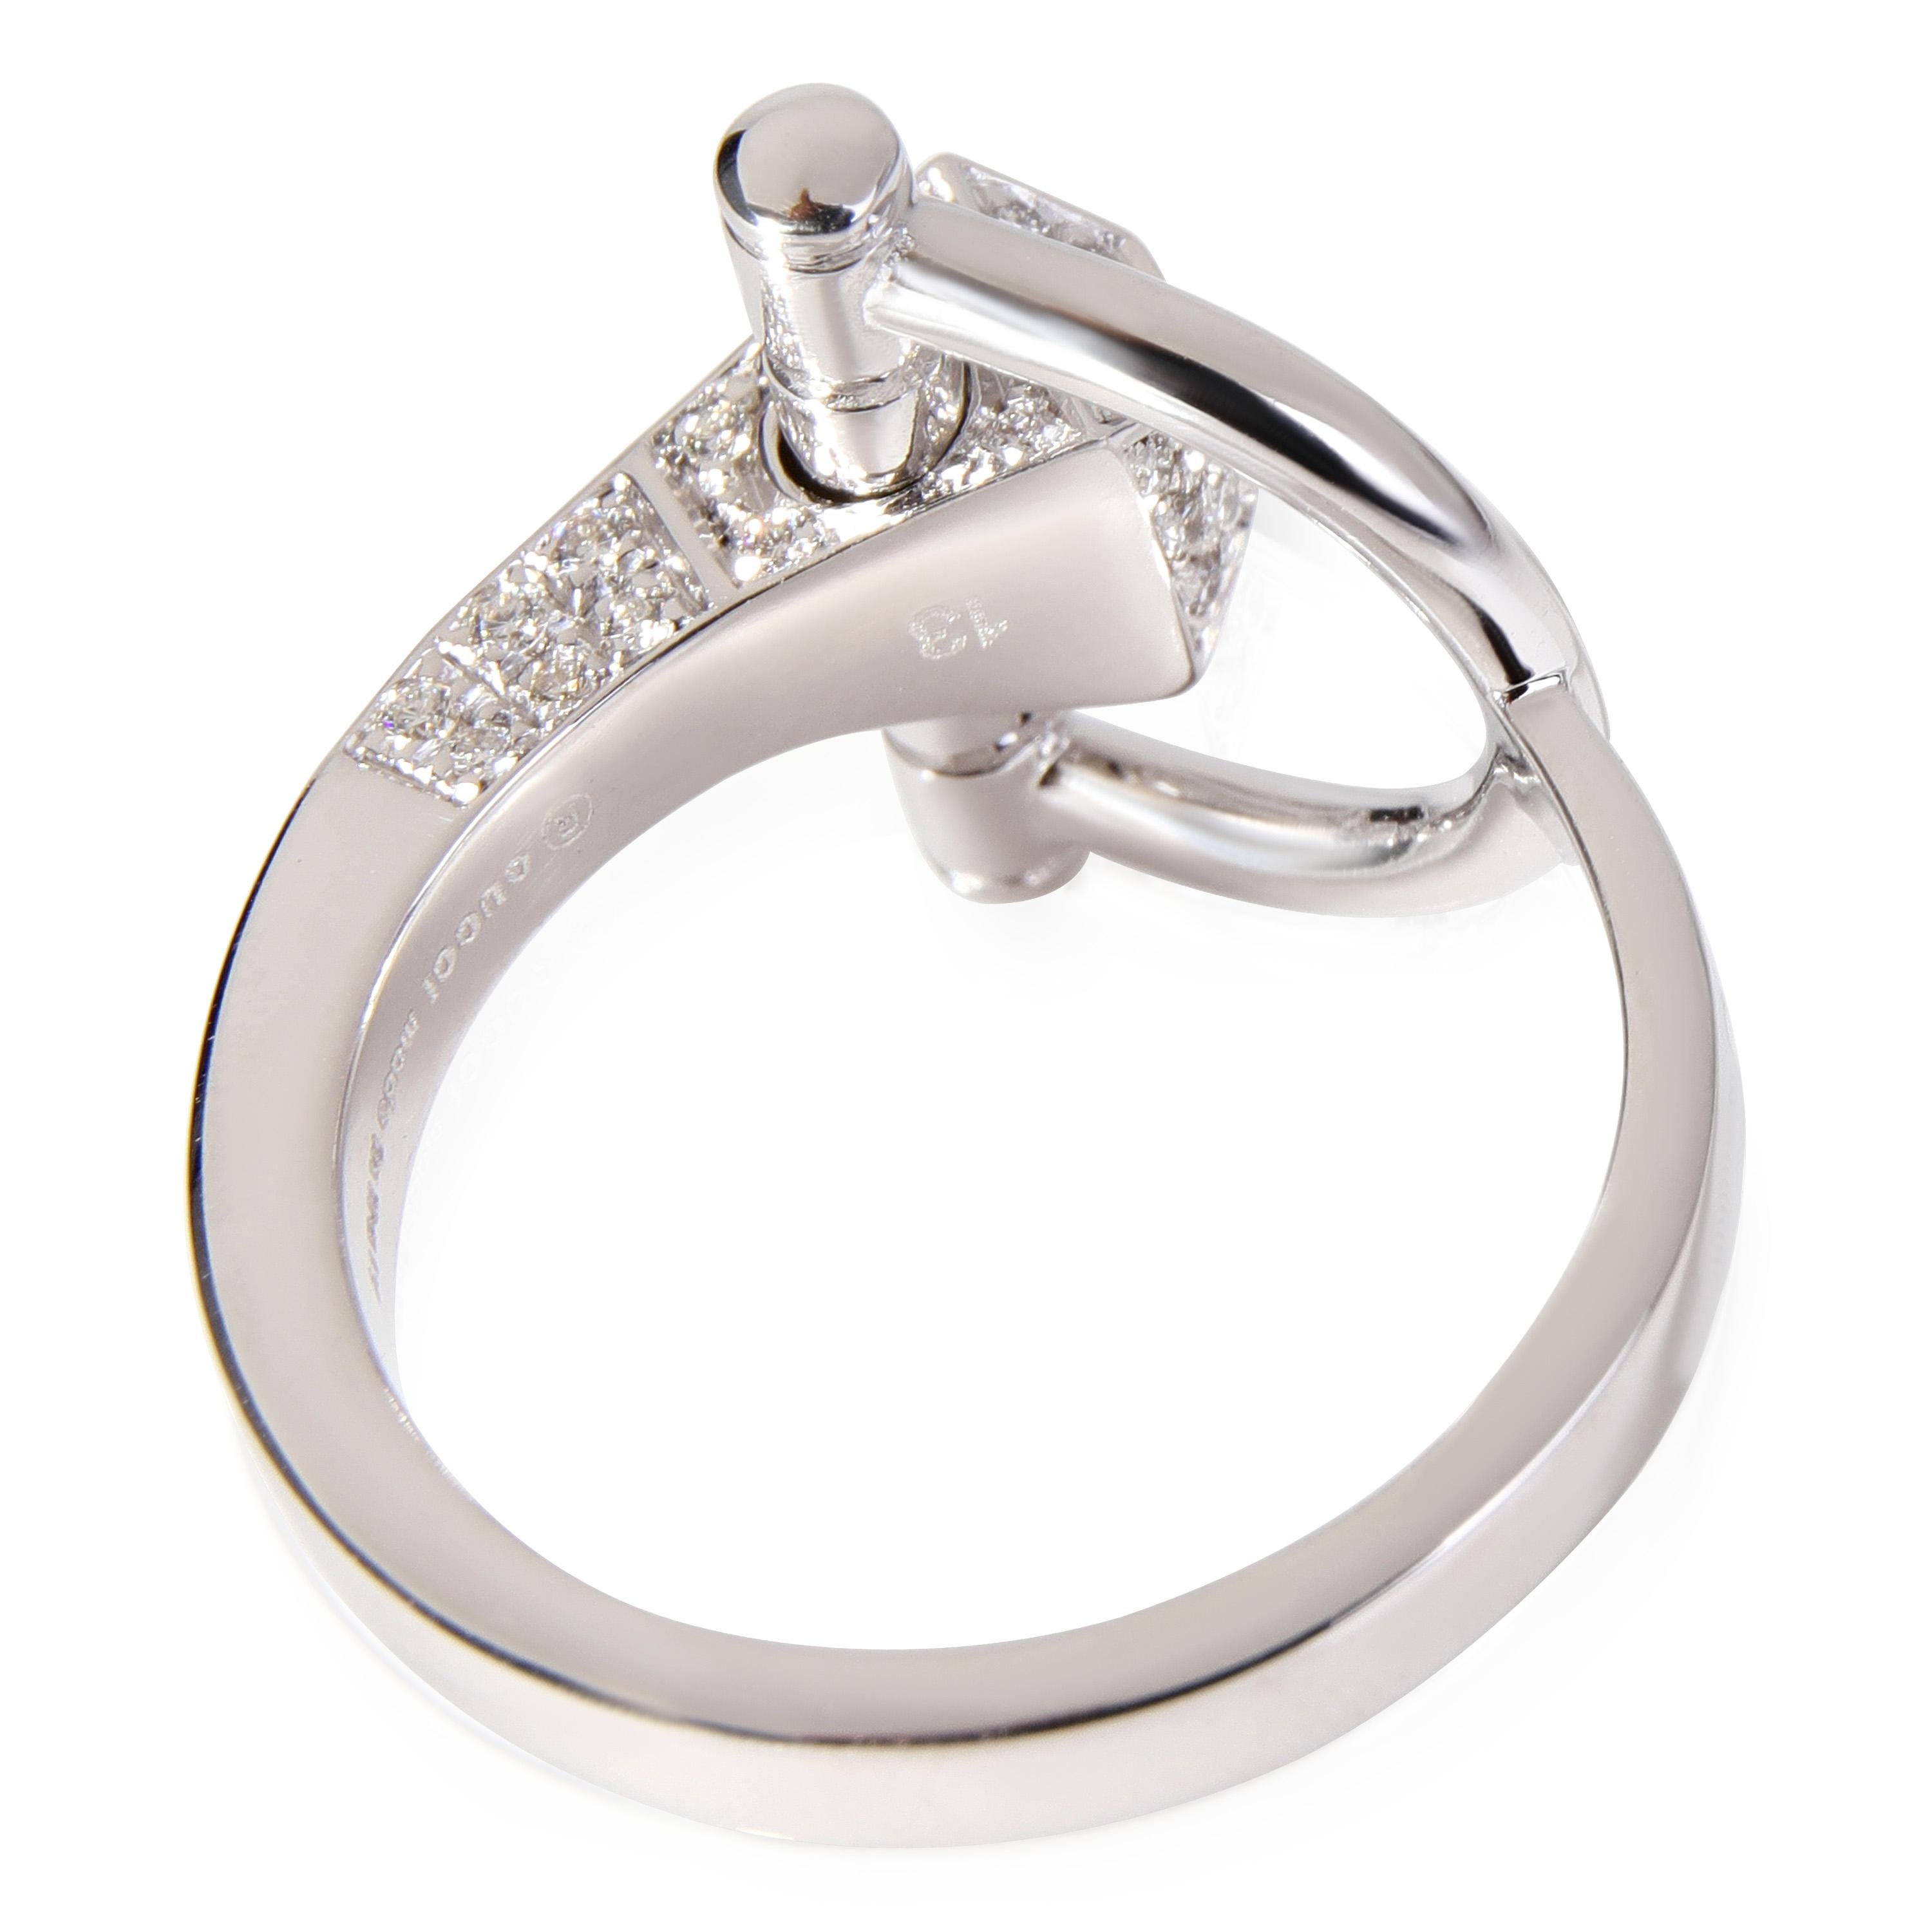 Gucci Chiodo Horsebit Diamond Ring in 18k White Gold 0.40 CTW

PRIMARY DETAILS
SKU: 120677
Listing Title: Gucci Chiodo Horsebit Diamond Ring in 18k White Gold 0.40 CTW
Condition Description: Retails for 4500 USD. In excellent condition and recently